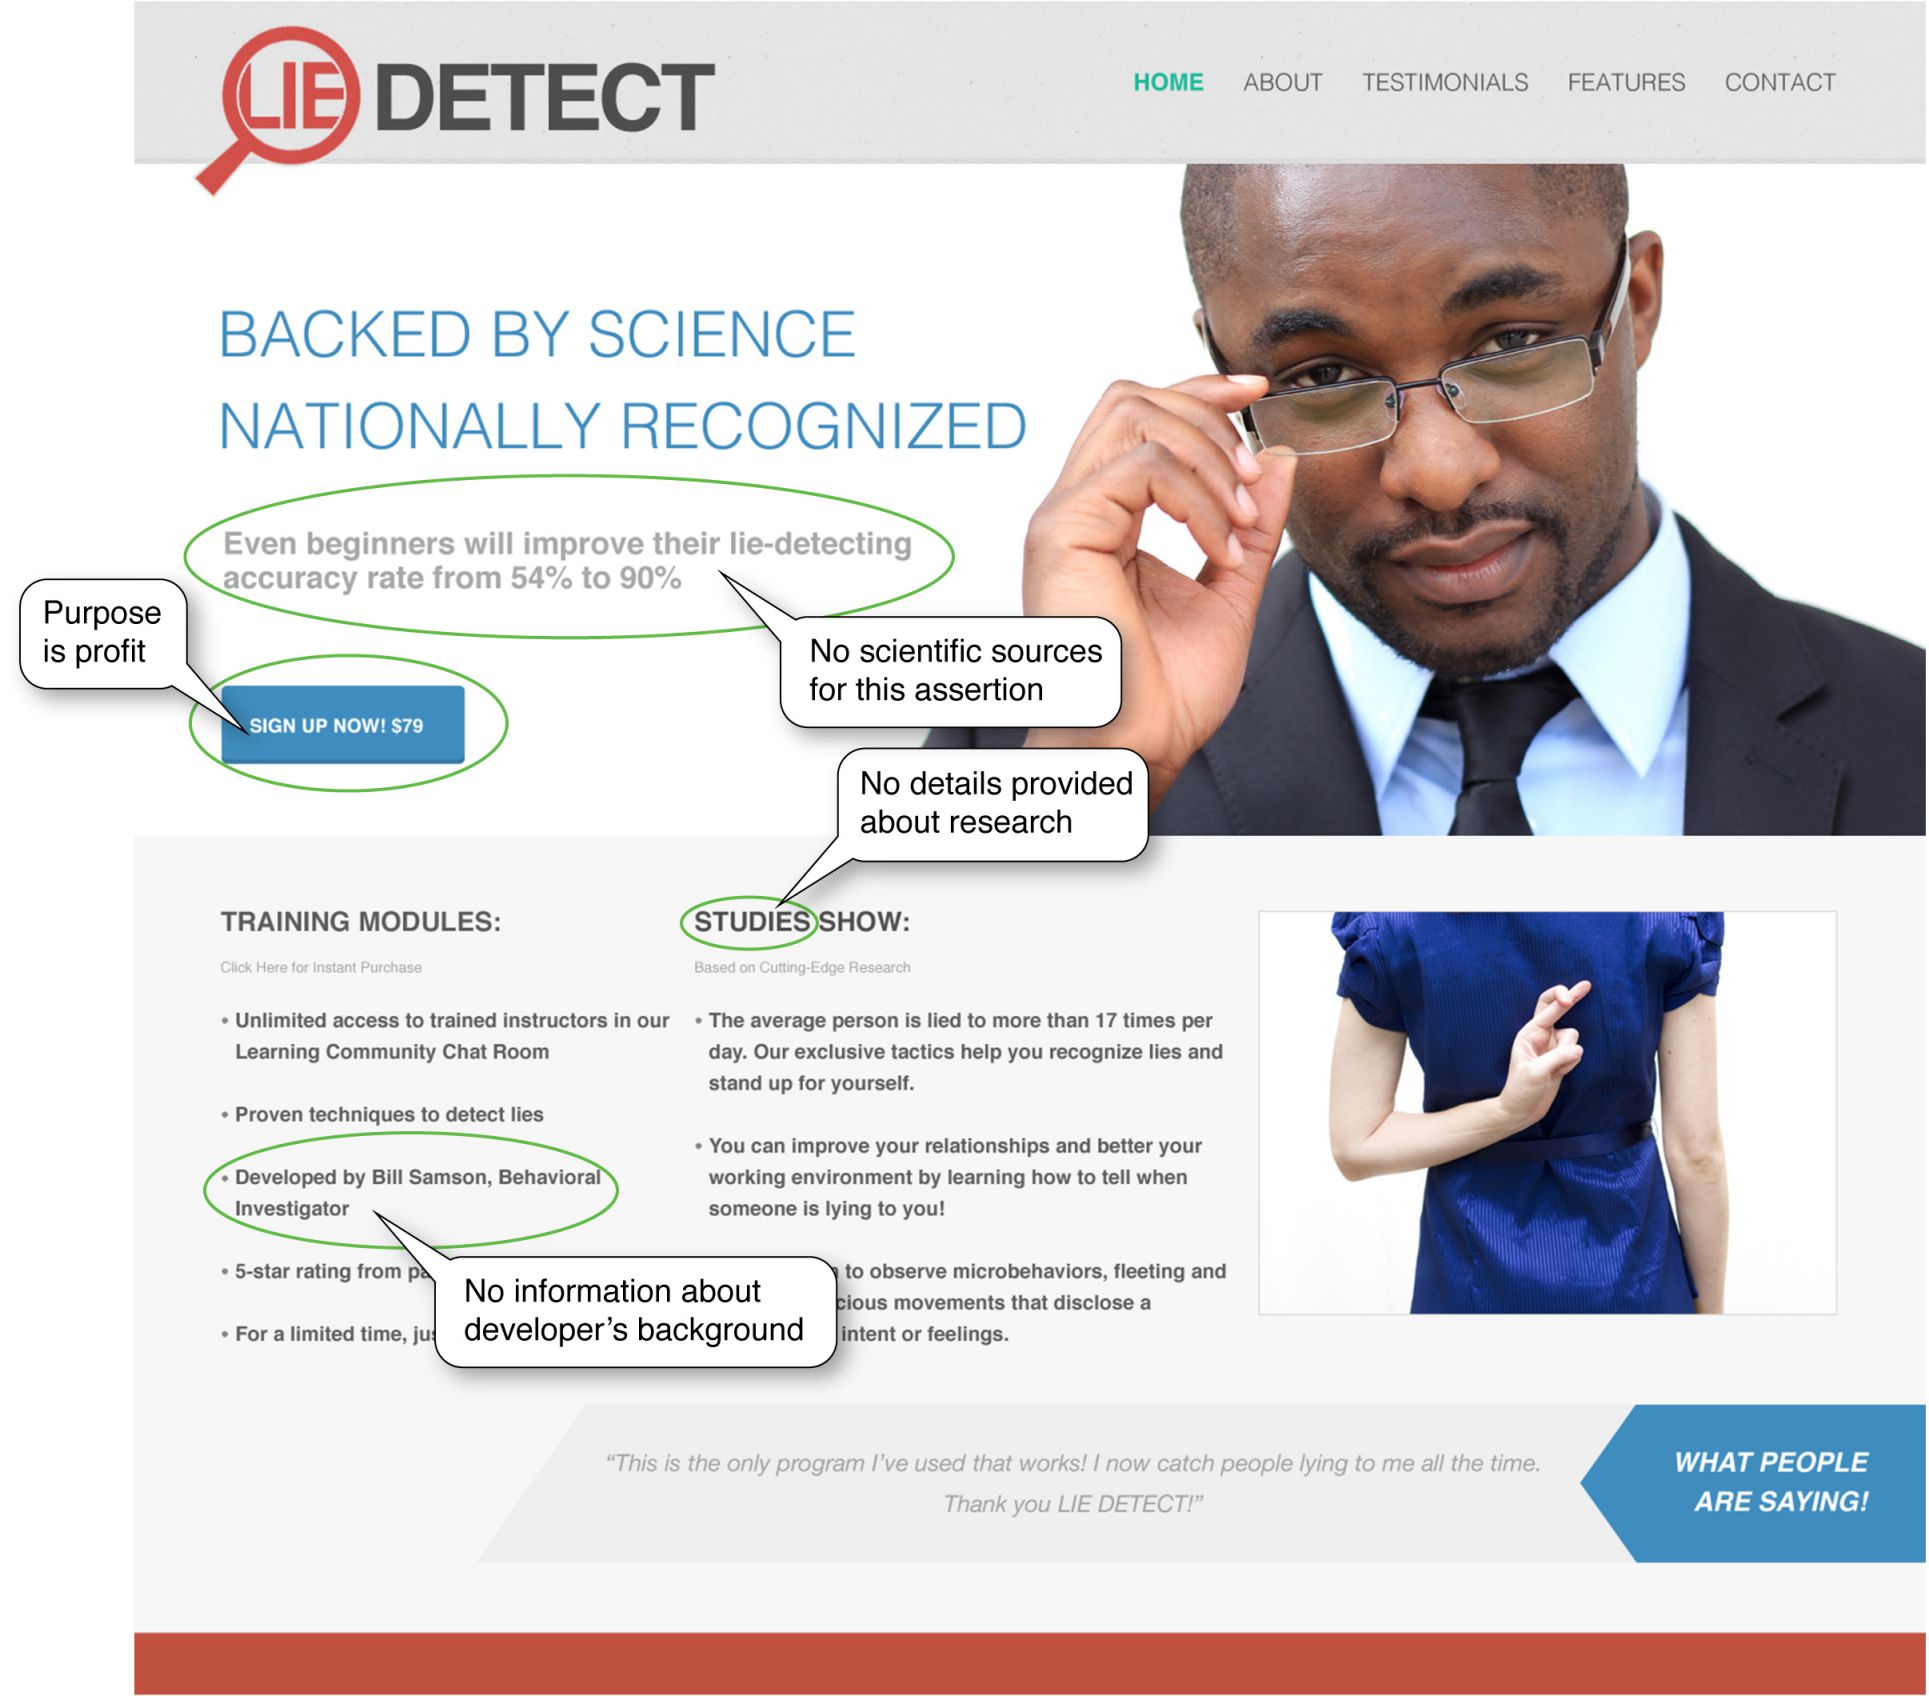 The photo of the Lie Detect webpage highlights the nonscientific evidence that the site provides.